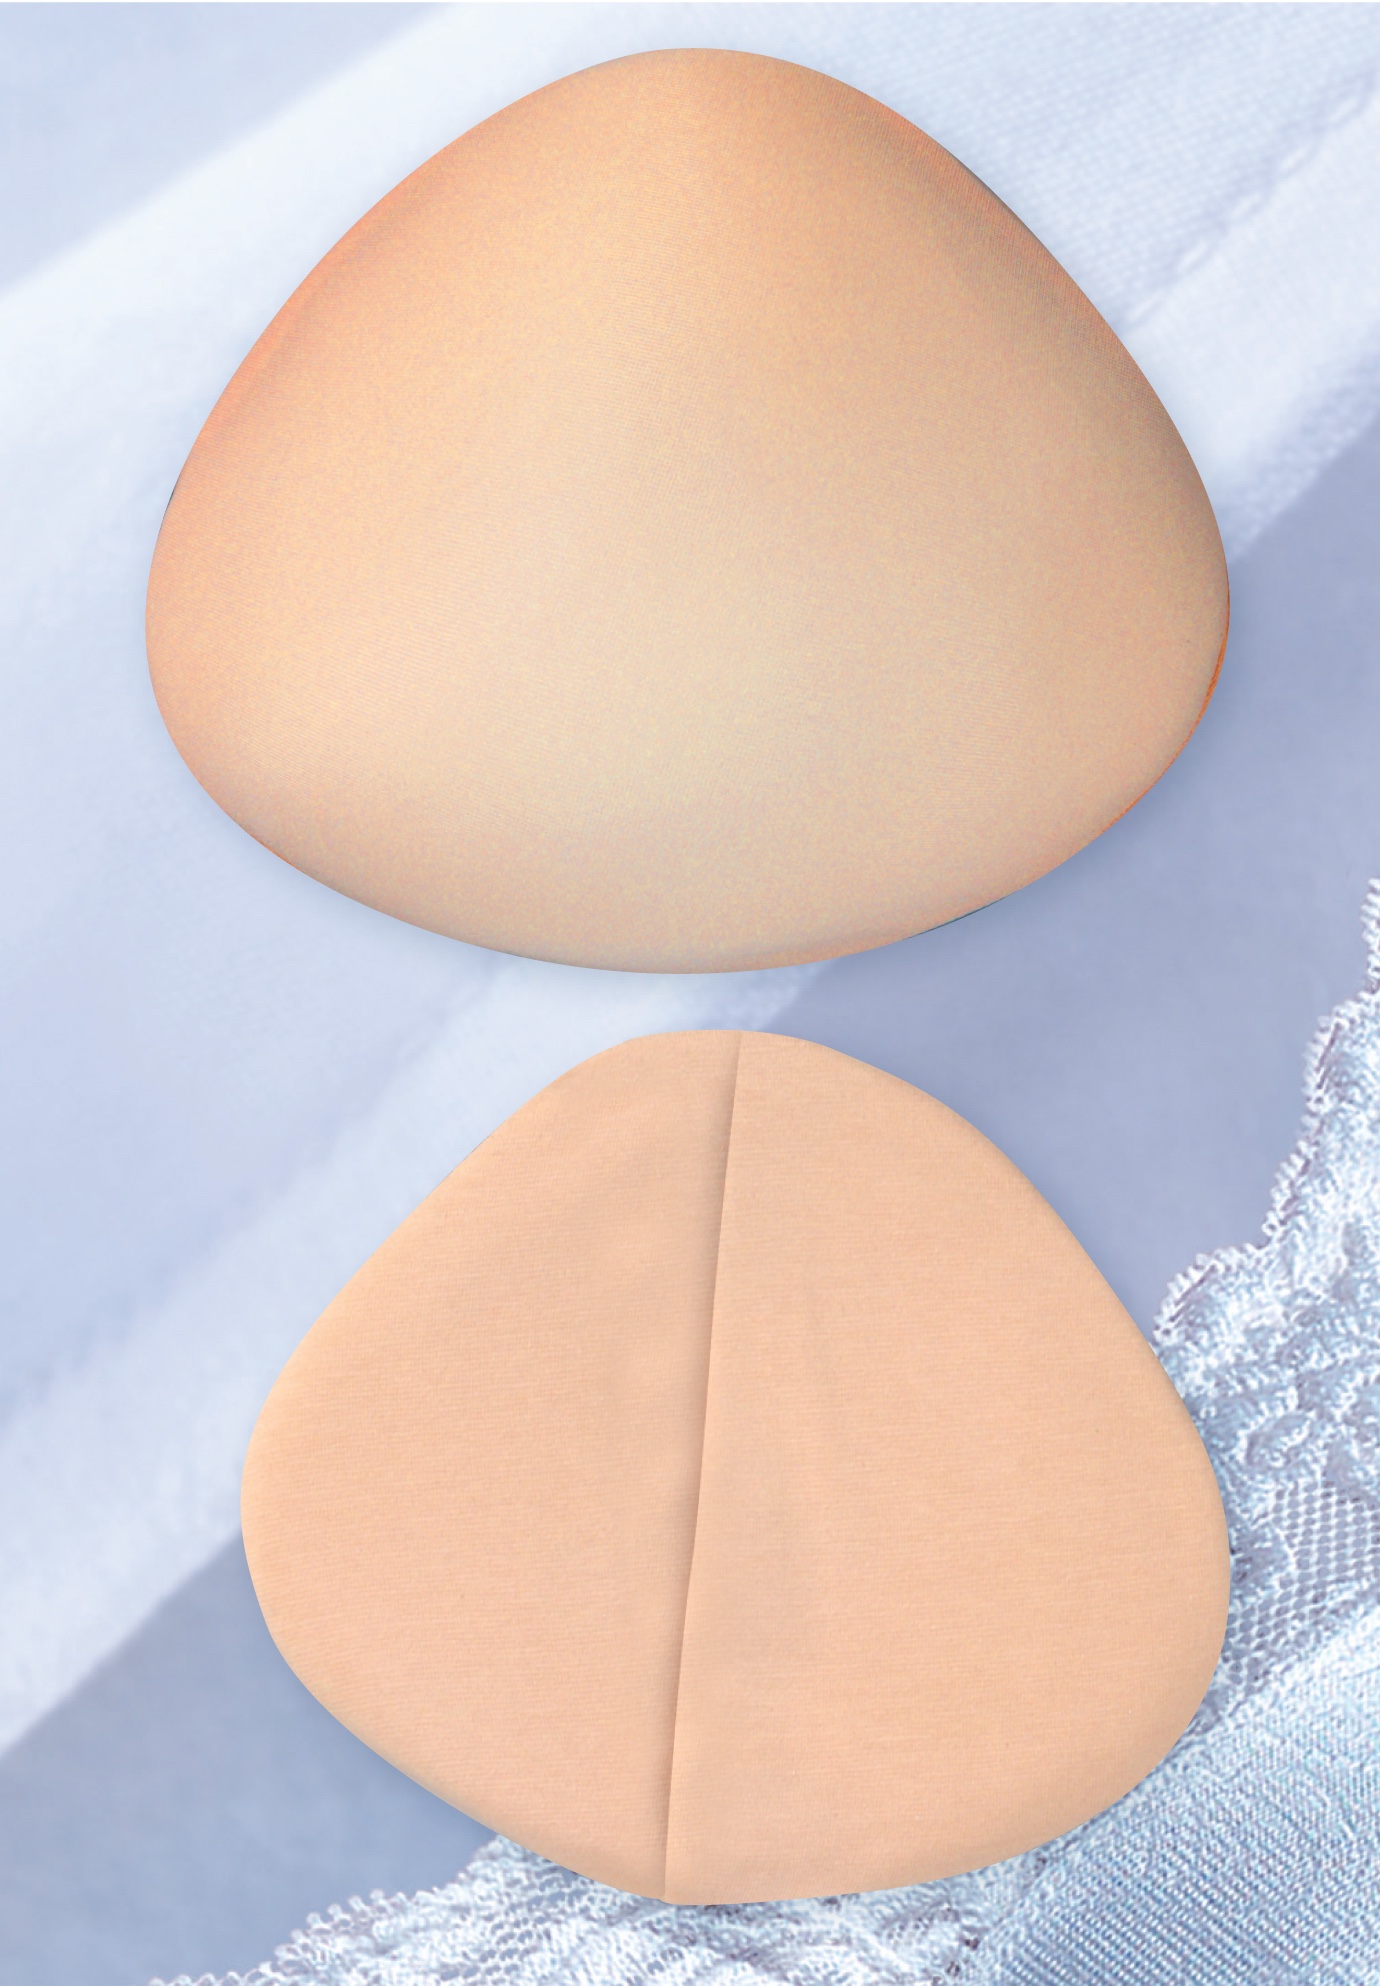 How To Make Homemade Breast Forms